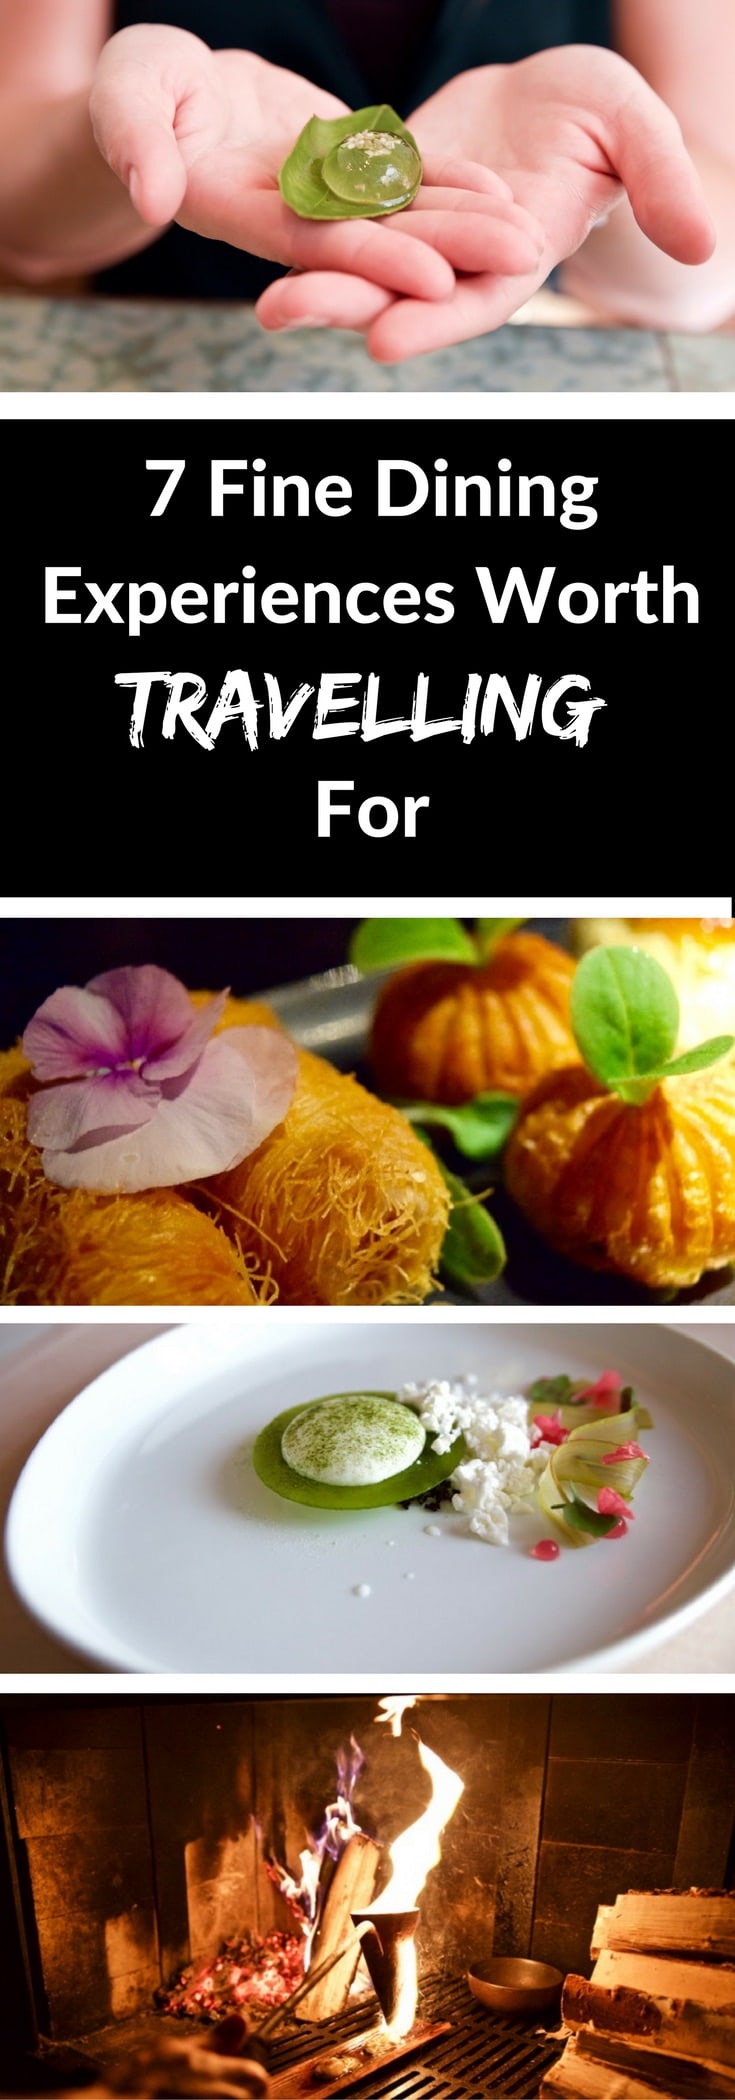 7 Top Food Experiences Worth Travelling For